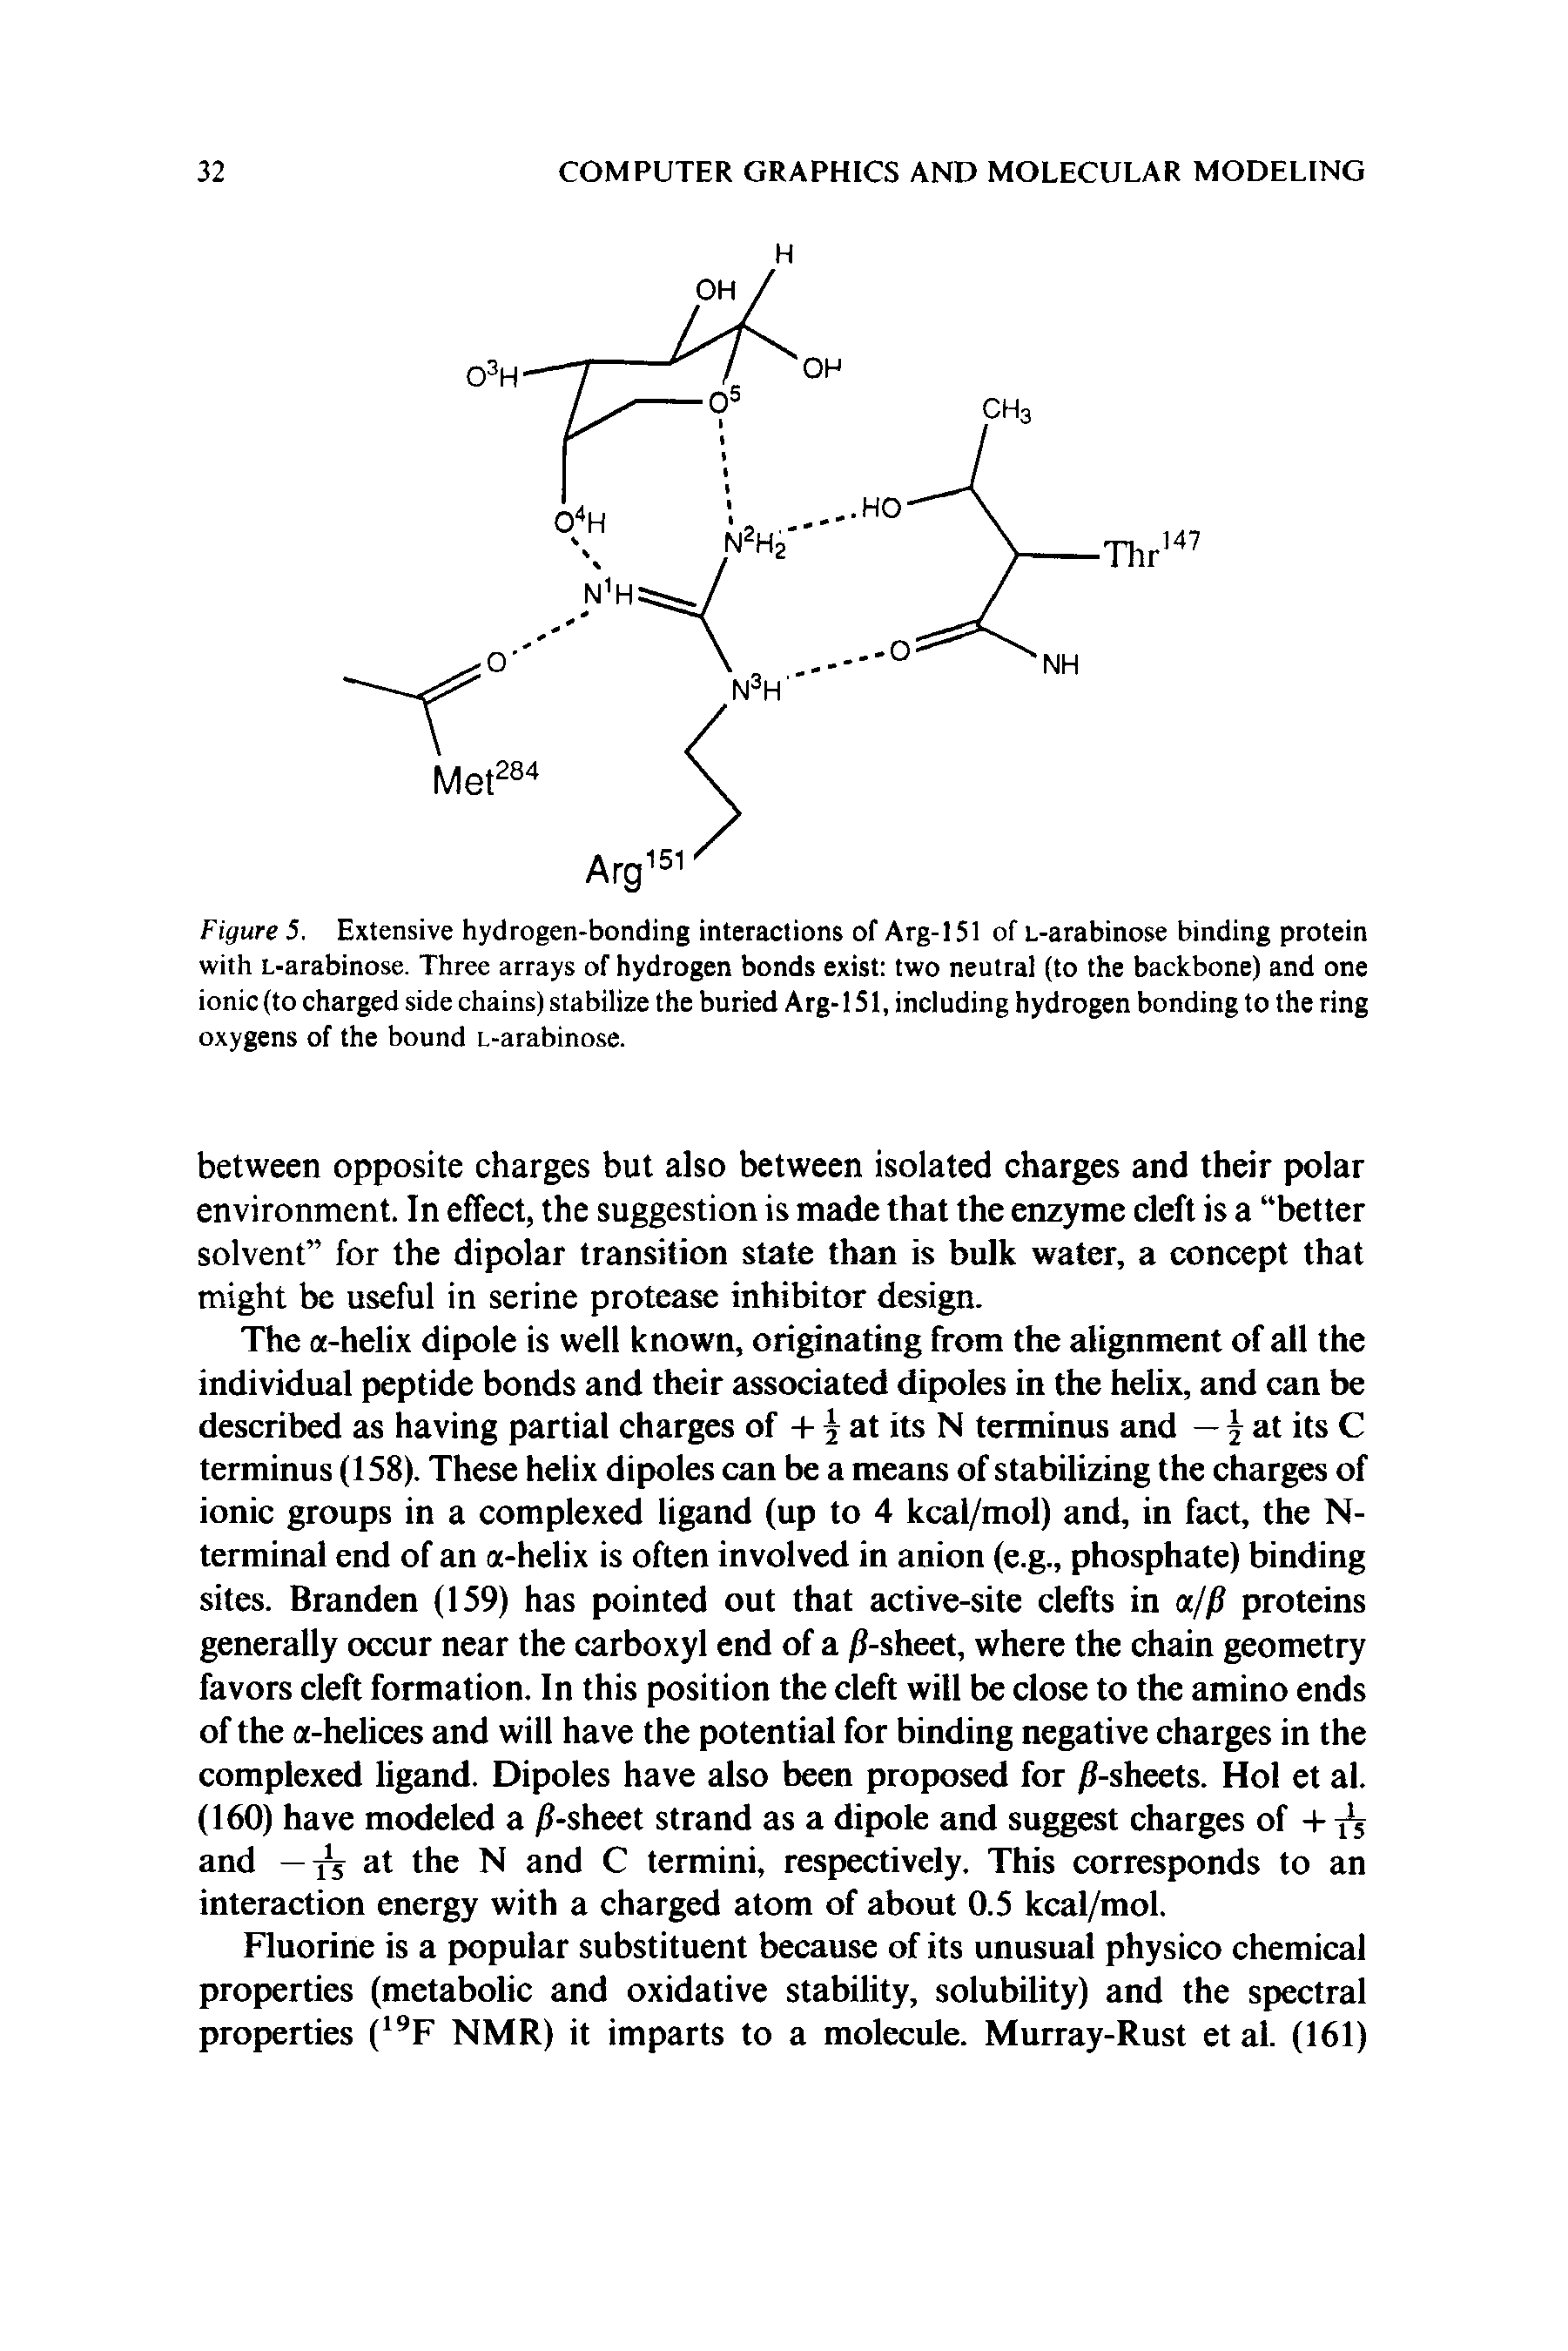 Figure 5. Extensive hydrogen-bonding interactions of Arg-151 of L-arabinose binding protein with L-arabinose. Three arrays of hydrogen bonds exist two neutral (to the backbone) and one ionic (to charged side chains) stabilize the buried Arg-151, including hydrogen bonding to the ring oxygens of the bound L-arabinose.